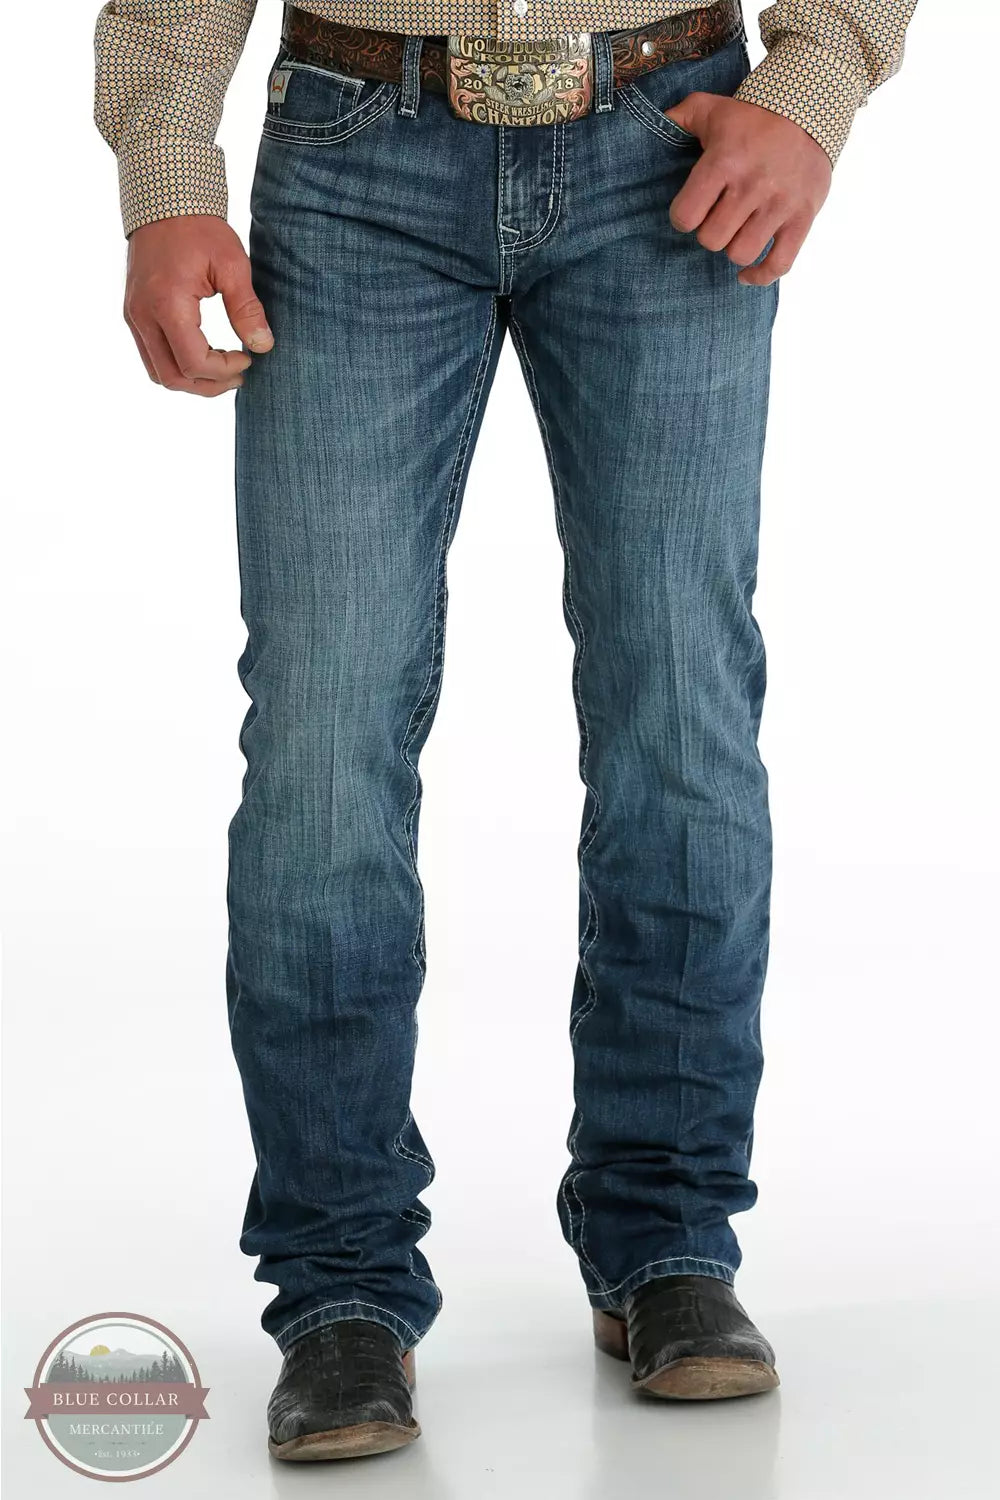 Cinch MB57936001 IND Ian Slim Straight Jeans in Medium Stonewash Front View